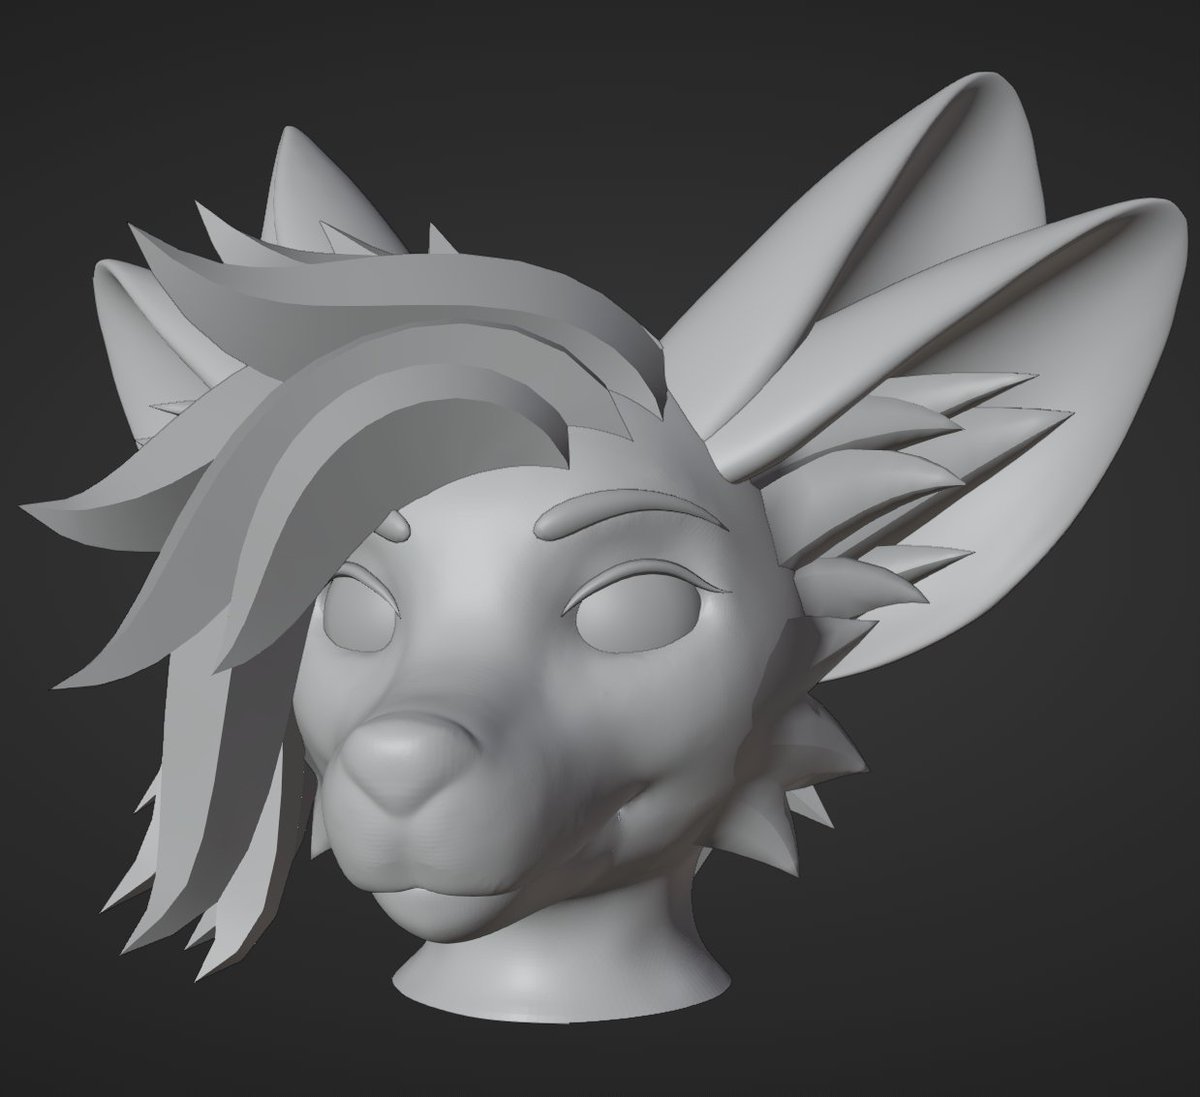 Did some sculpting today! Decided to start work on a Fennix, a species made by @ariverofstars!

Tell me whatcha guys think of em' so far! 

(And yes it's using my Vulparii hair so it's not bald LMAO)

#VRChat #VR #VRC #Furry #VRChatAvatar #VRCFurry